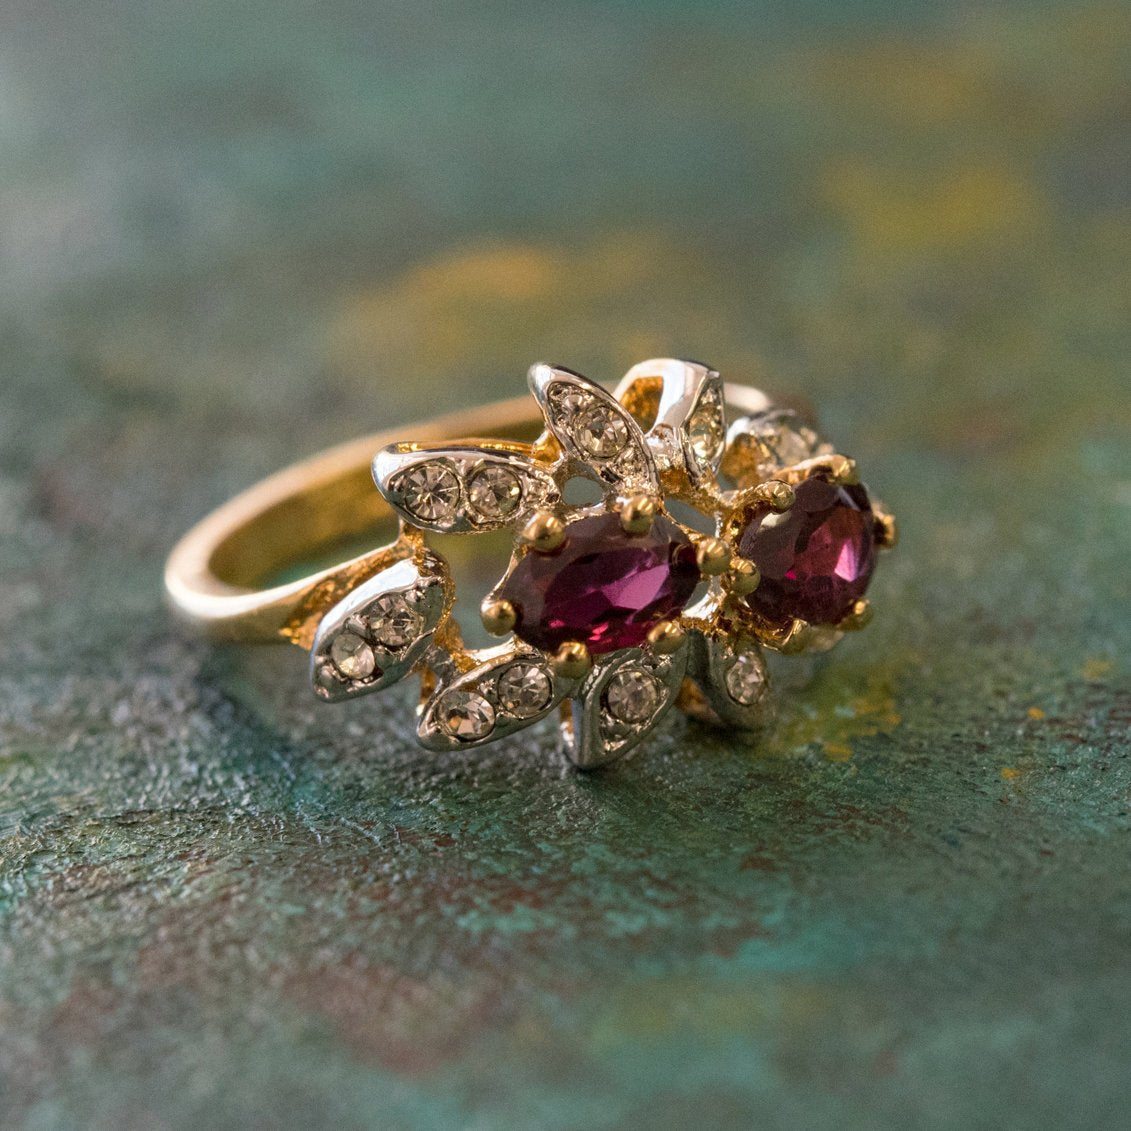 Vintage Ring Genuine Garnet and Clear Swarovski Crystals 18kt Gold Plated Band January Birthstone R1717 Size: 9